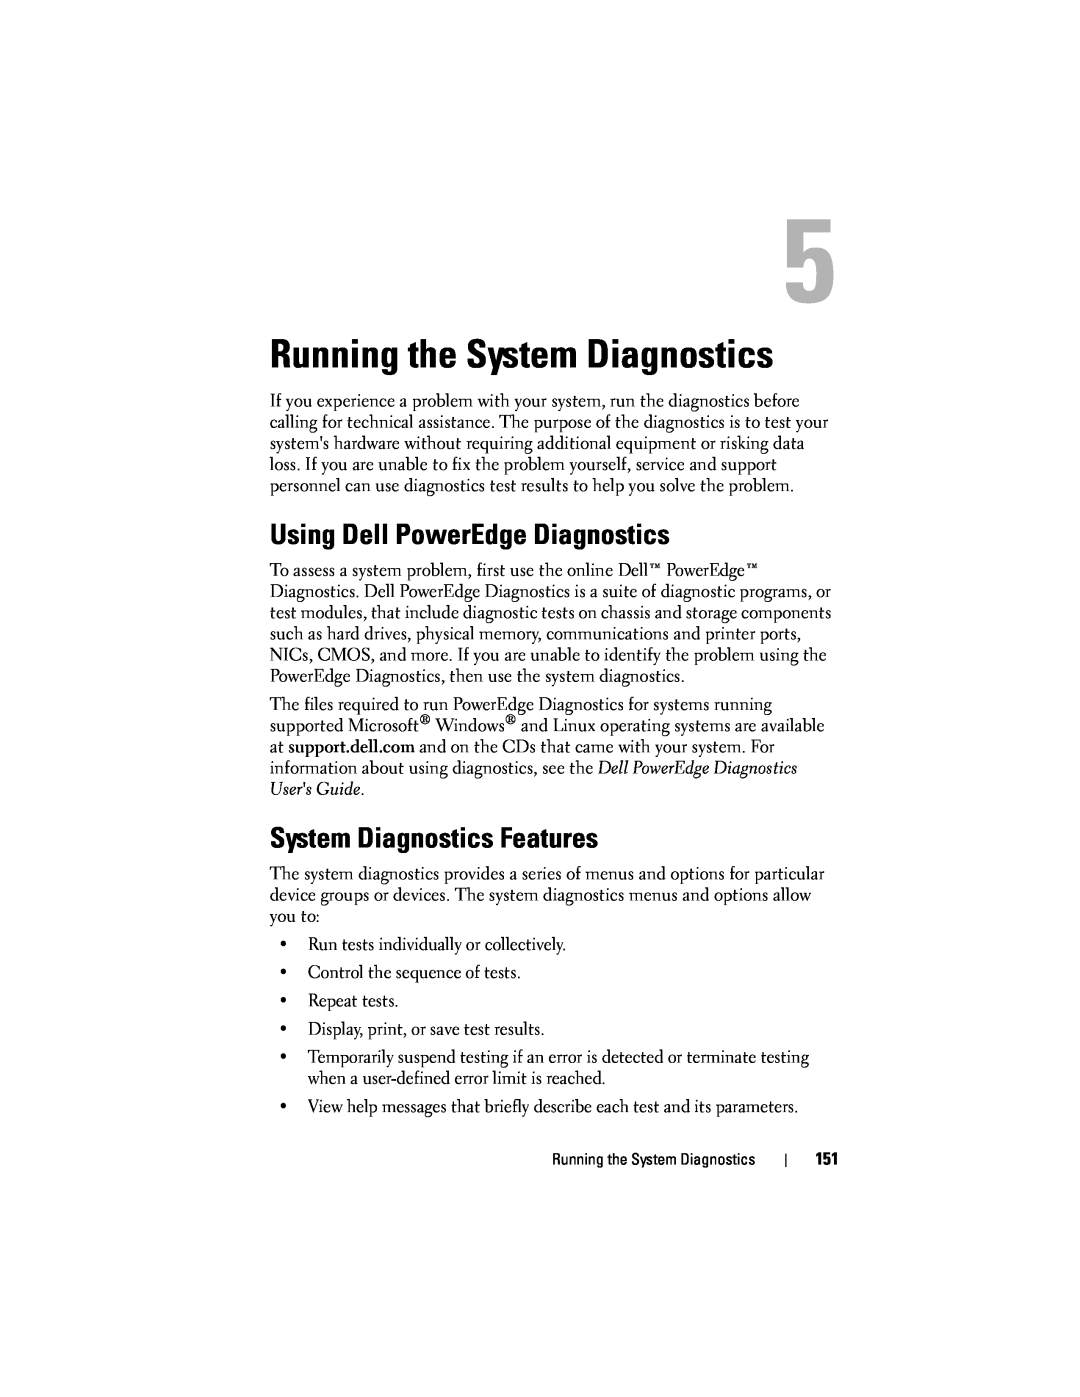 Dell R300 owner manual Running the System Diagnostics, Using Dell PowerEdge Diagnostics, System Diagnostics Features 